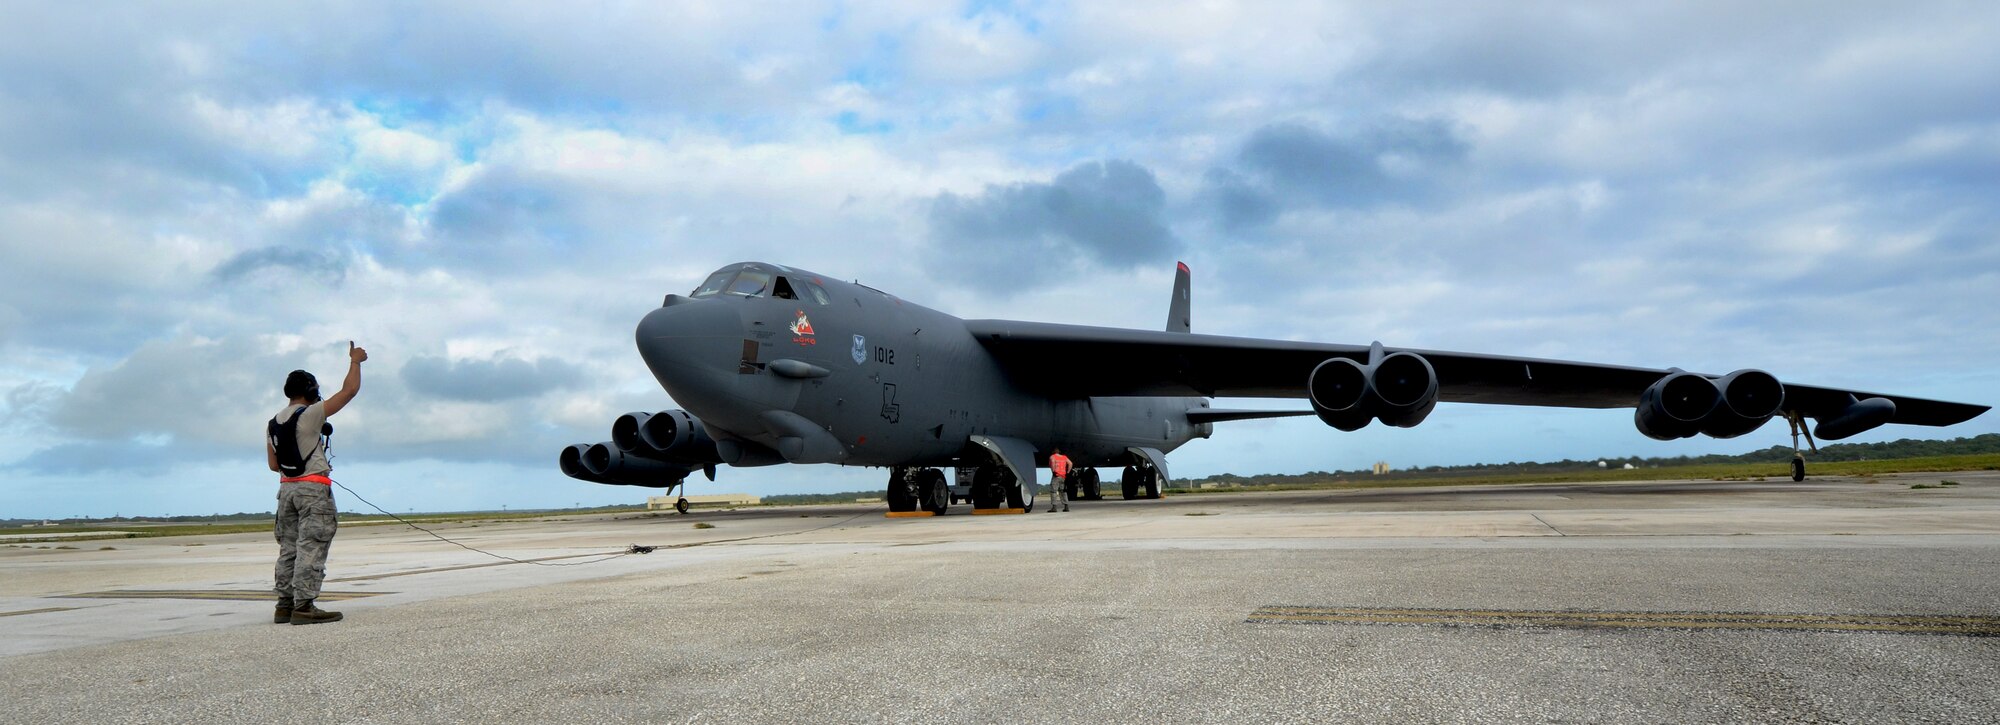 Airman 1st Class Julius Smith, 36th Expeditionary Aircraft Maintenance Squadron crew chief, deployed from Minot Air Force Base, N.D., prepares a B-52 Stratofortress for takeoff at Andersen Air Force Base, Guam, April 2, 2013. A new rotation of aircrews, maintenance personnel and aircraft arrived to Guam March 31 to replace the 96th Expeditionary Bomb Squadron in support of U.S. Pacific Command’s continuous bomber presence mission. (U.S. Air Force photo by Senior Airman Benjamin Wiseman/Released)